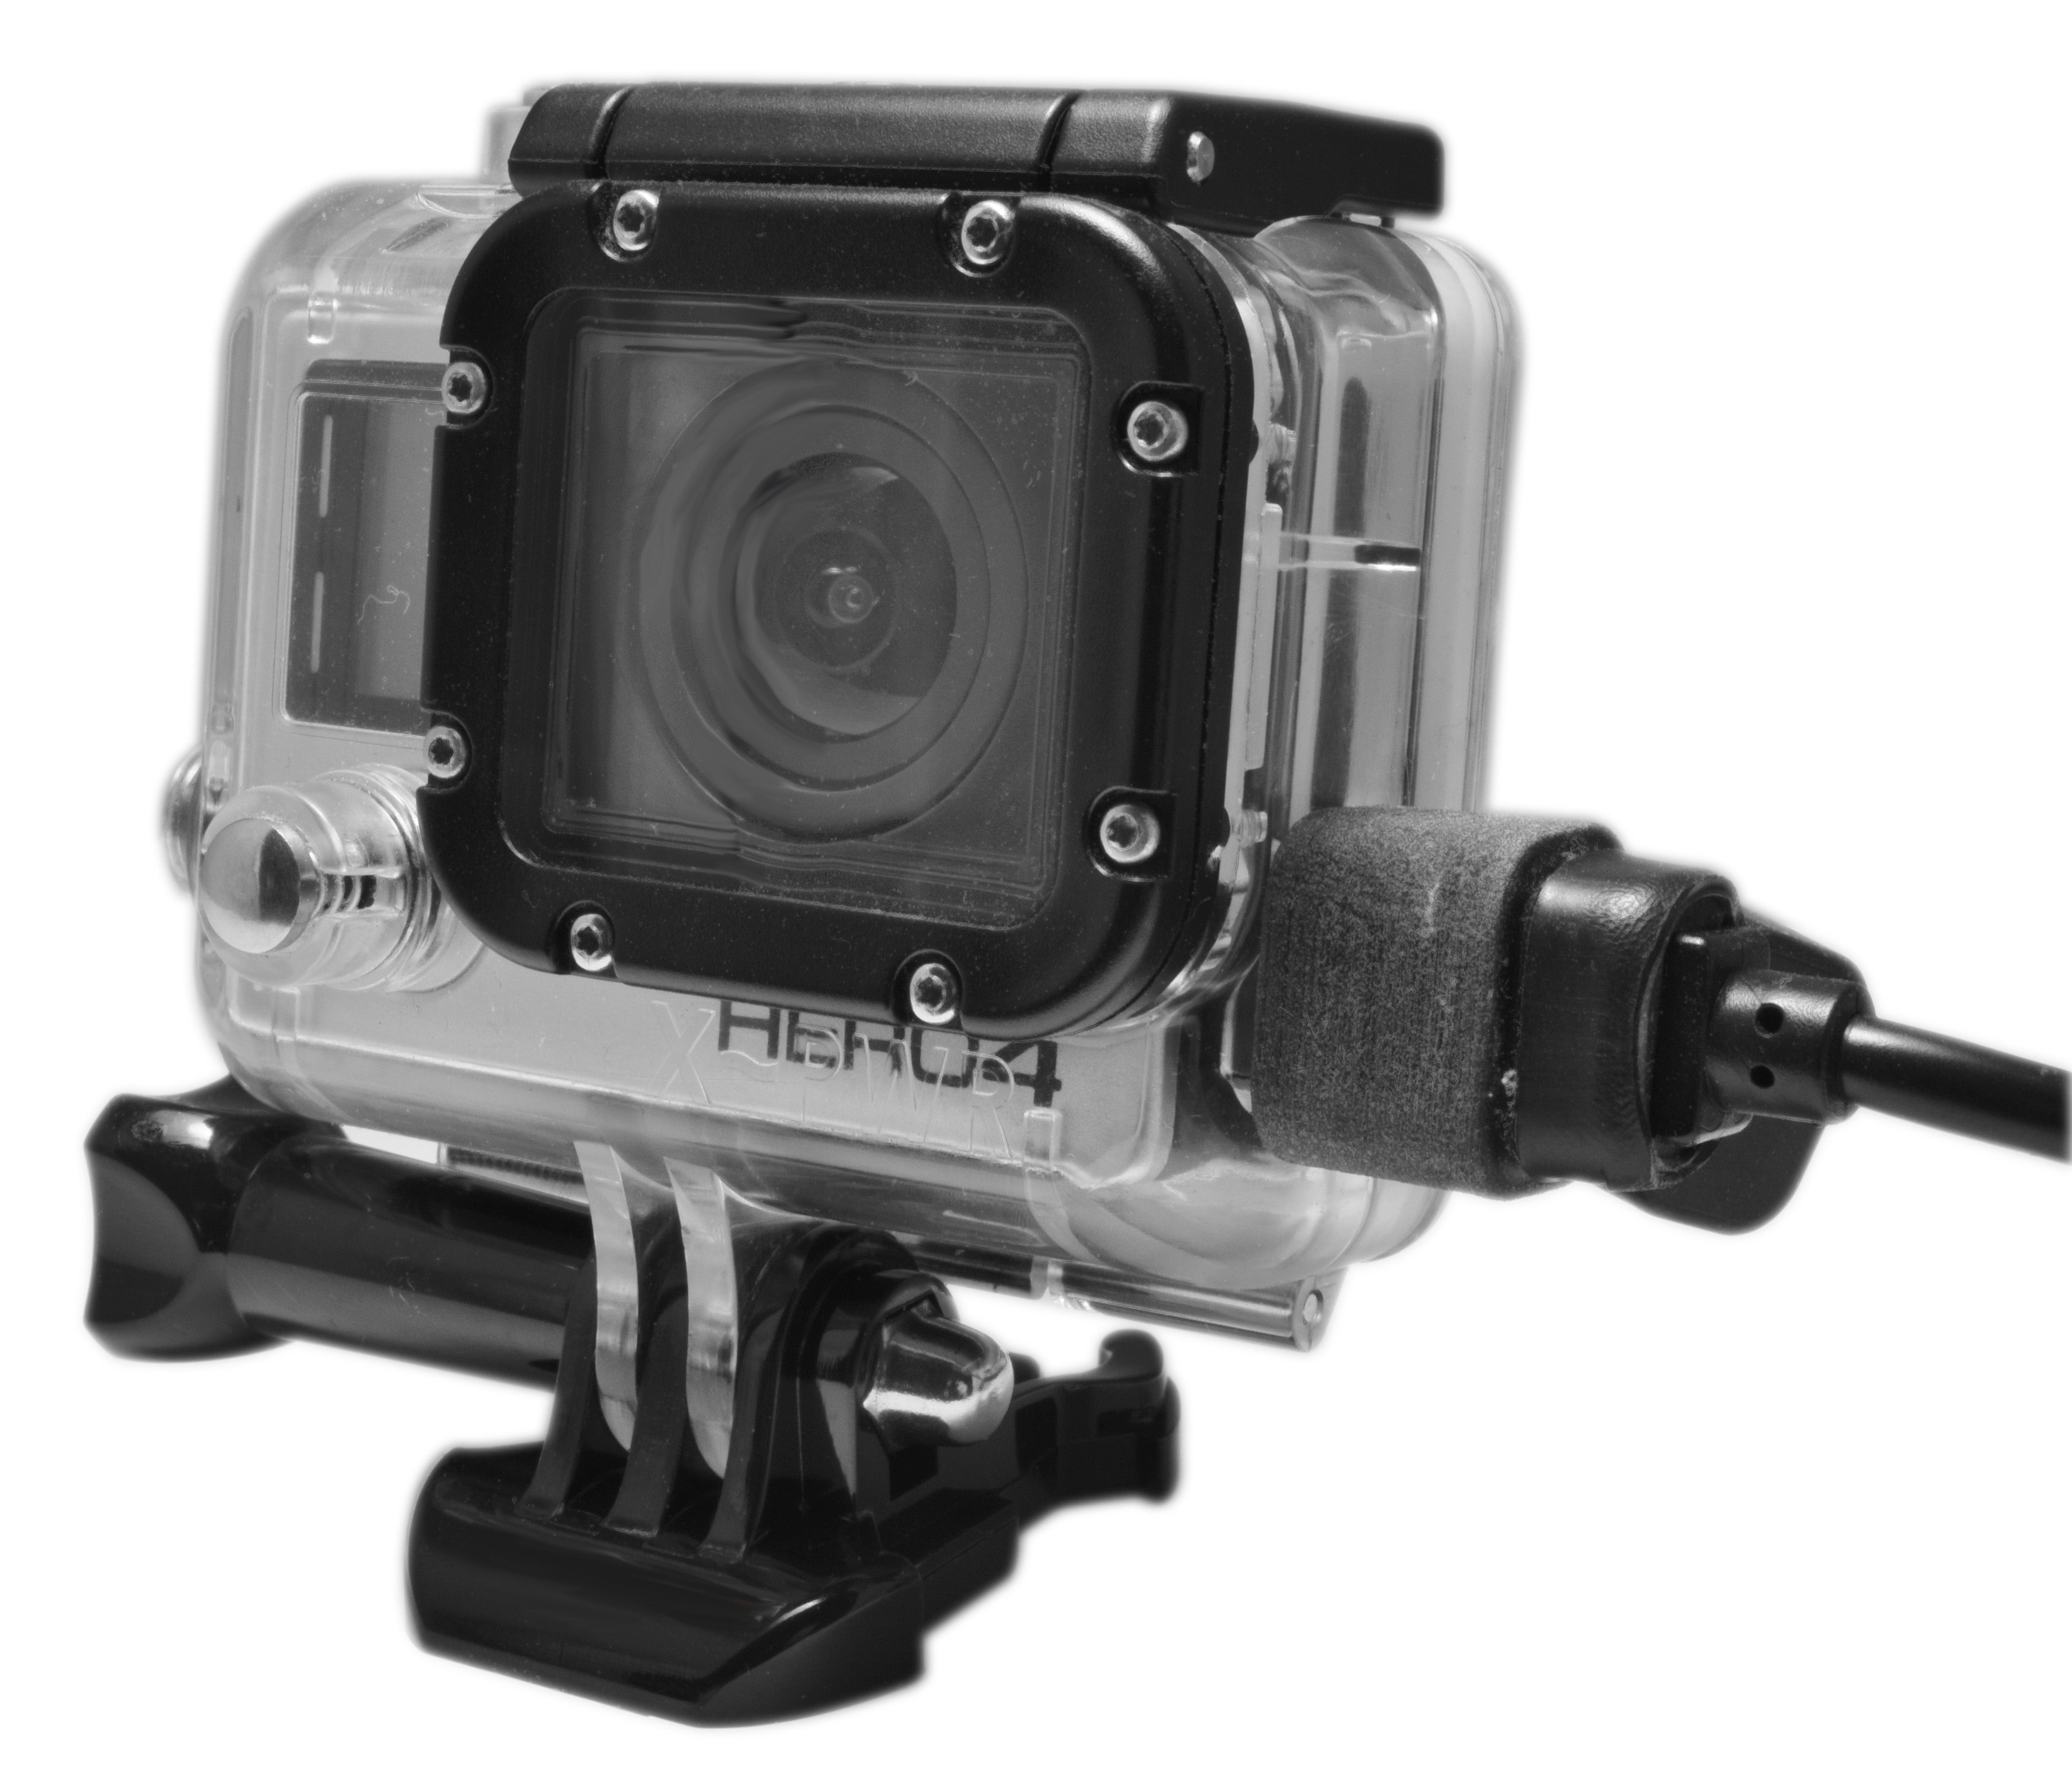 X~PWR™ All-weather, External Power Case for GoPro HERO3, HERO3+